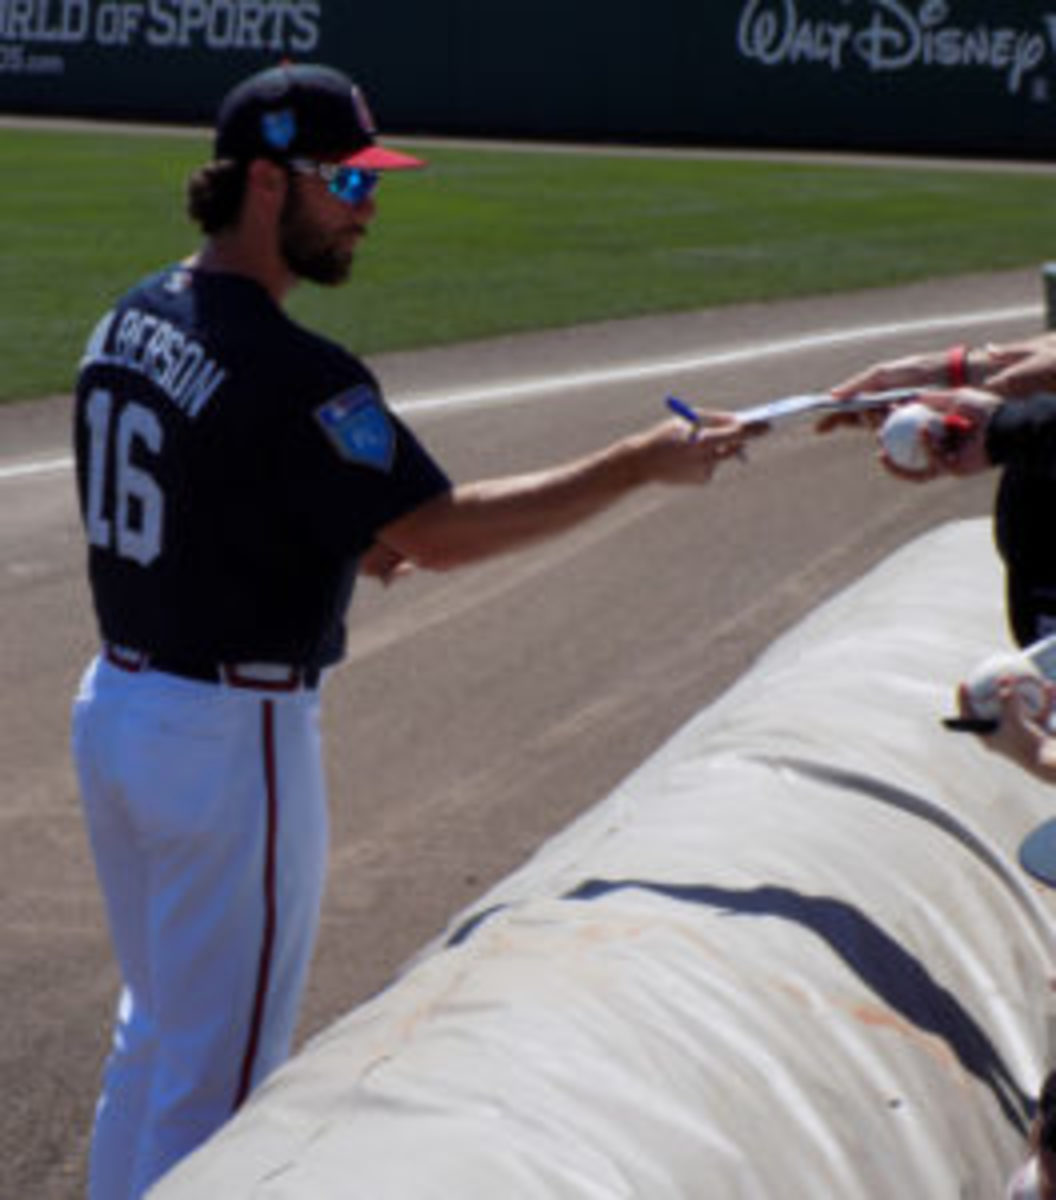  Atlanta Braves player Charlie Culberson signs autographs before a Spring Training game in Orlando, Florida.